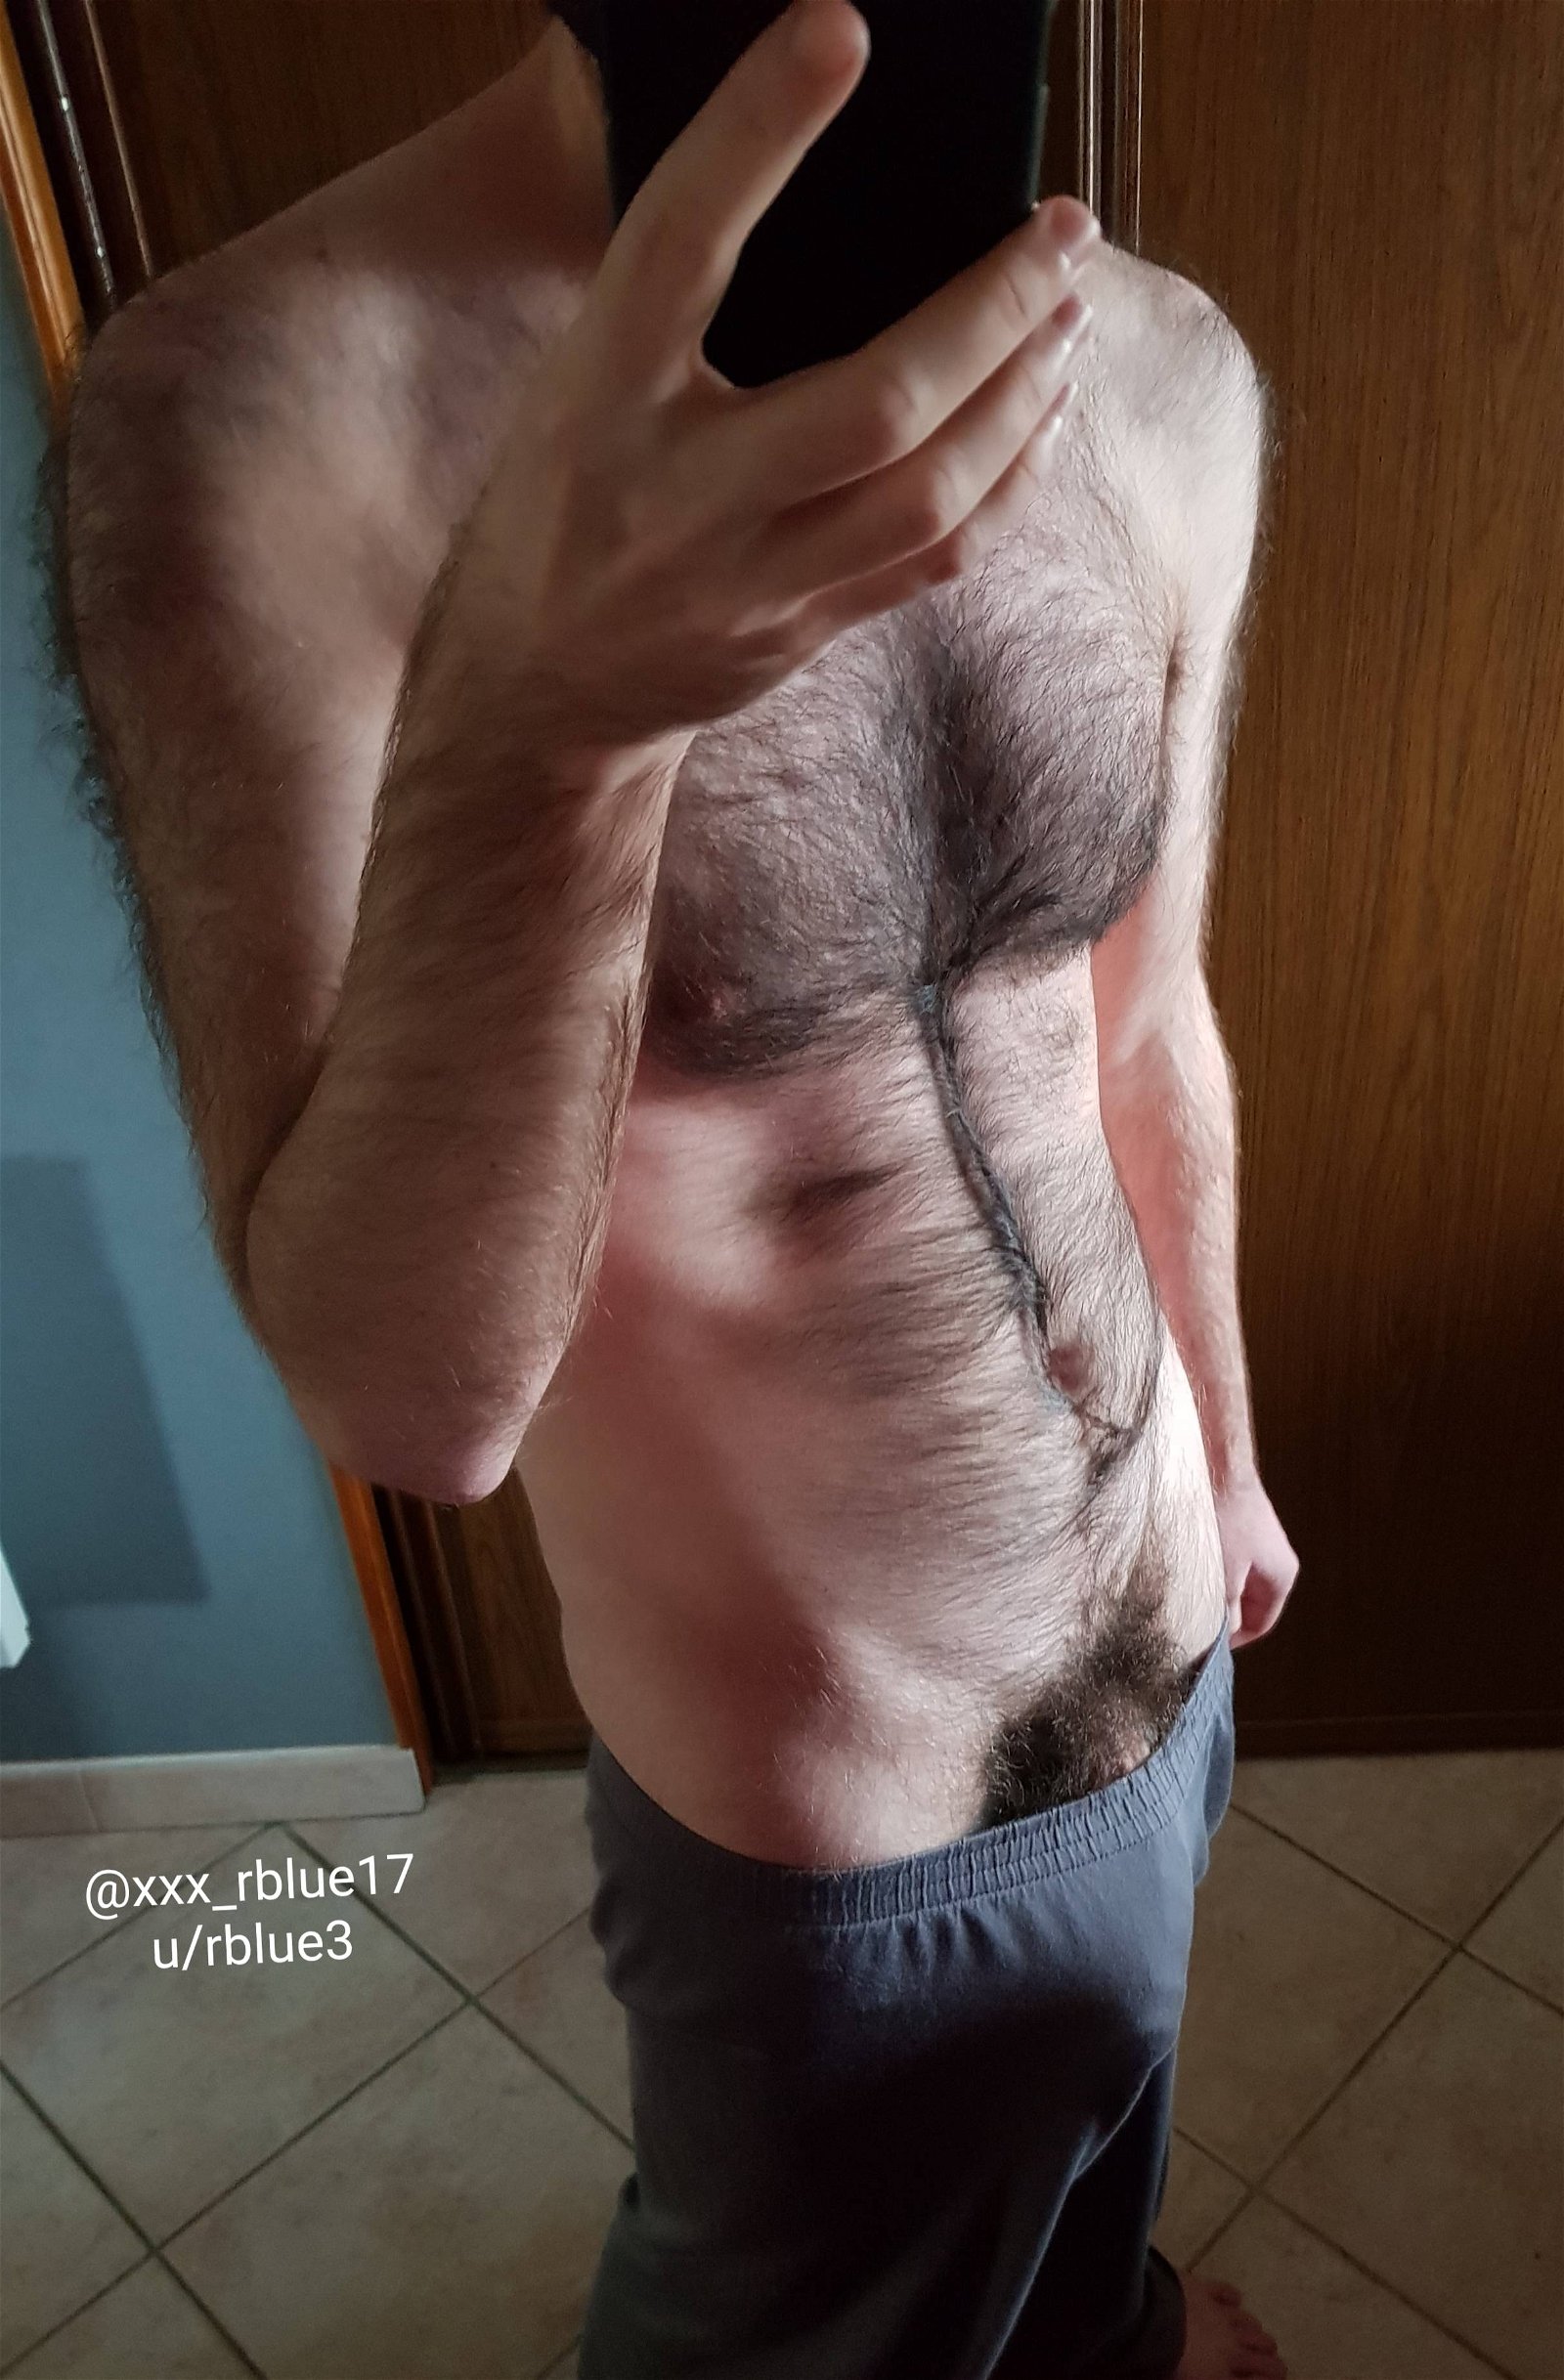 Photo by rblue with the username @rblue17, posted on December 21, 2019. The post is about the topic GayExTumblr and the text says 'Please look at my hairy body 😇 https://i.imgur.com/dnMFxY3.jpg'